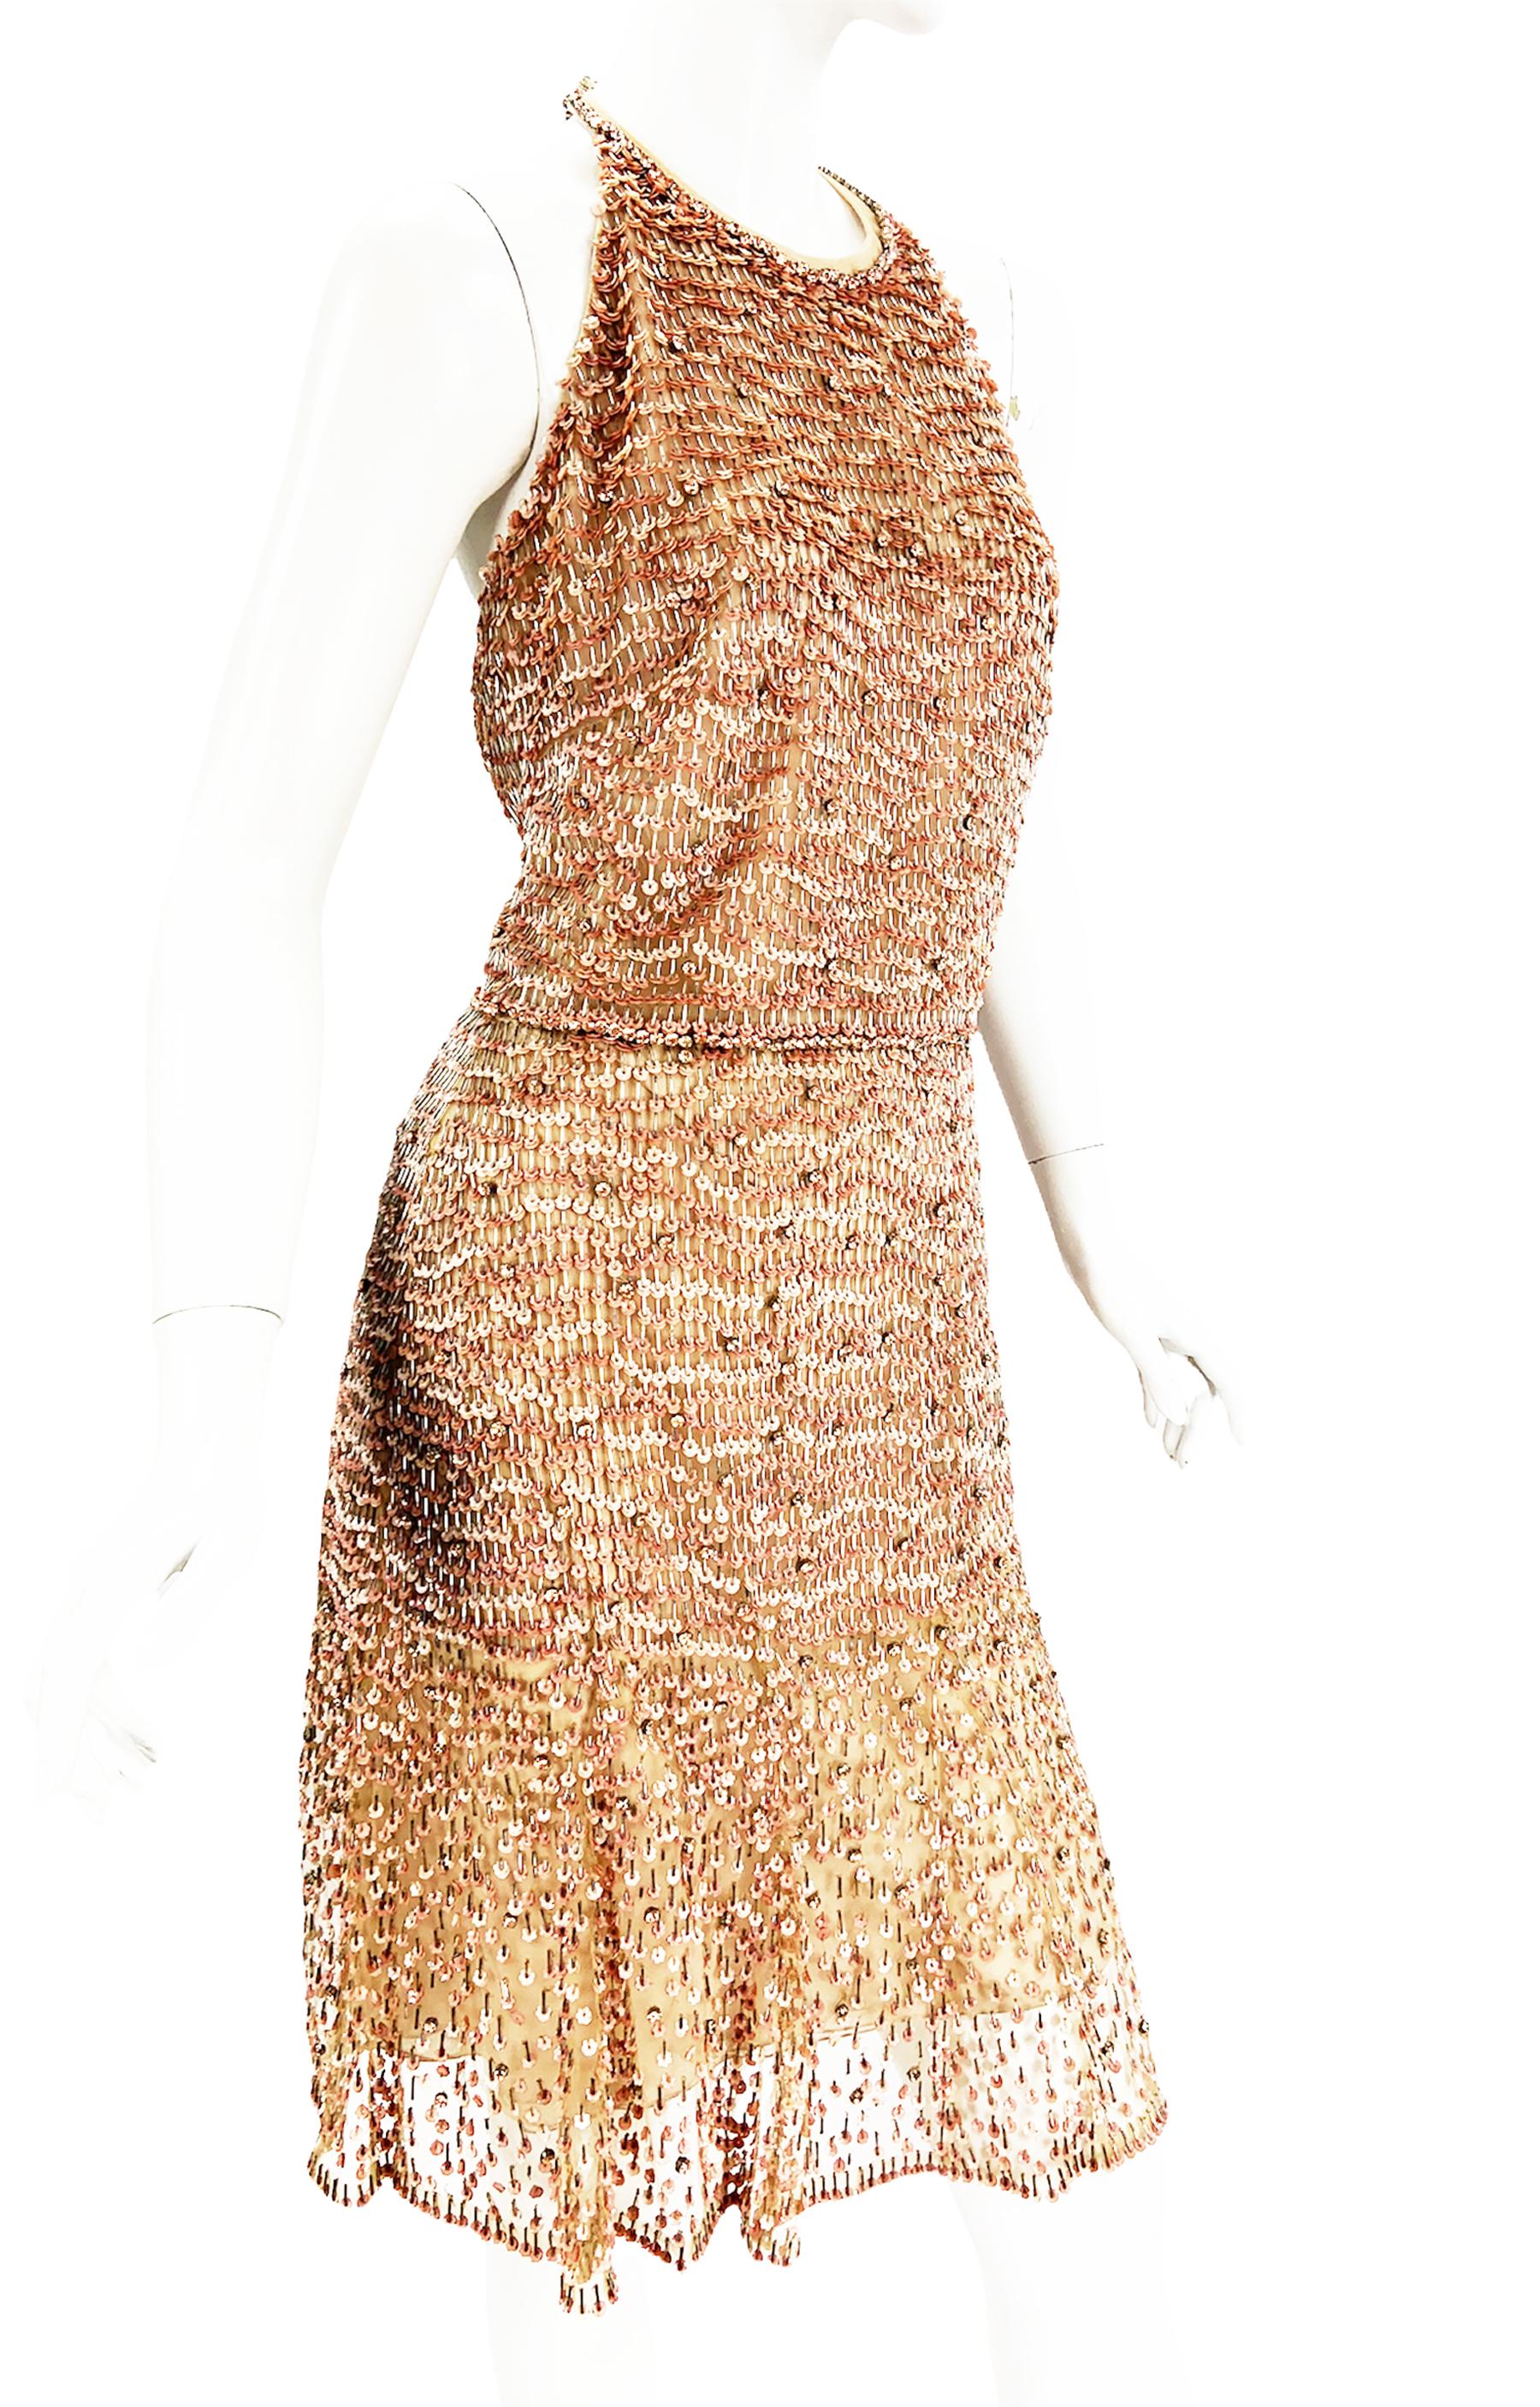 NWT Vintage Valentino Fully Beaded Cocktail Dress
Designer size - 40
Blush Pink Colors Paillette of Crystals, Tube Beads and Flower-shape Sequins Embellishment over the Nude Tulle.  
Bow Accent on the Neck, Fully Lined, Side Zip